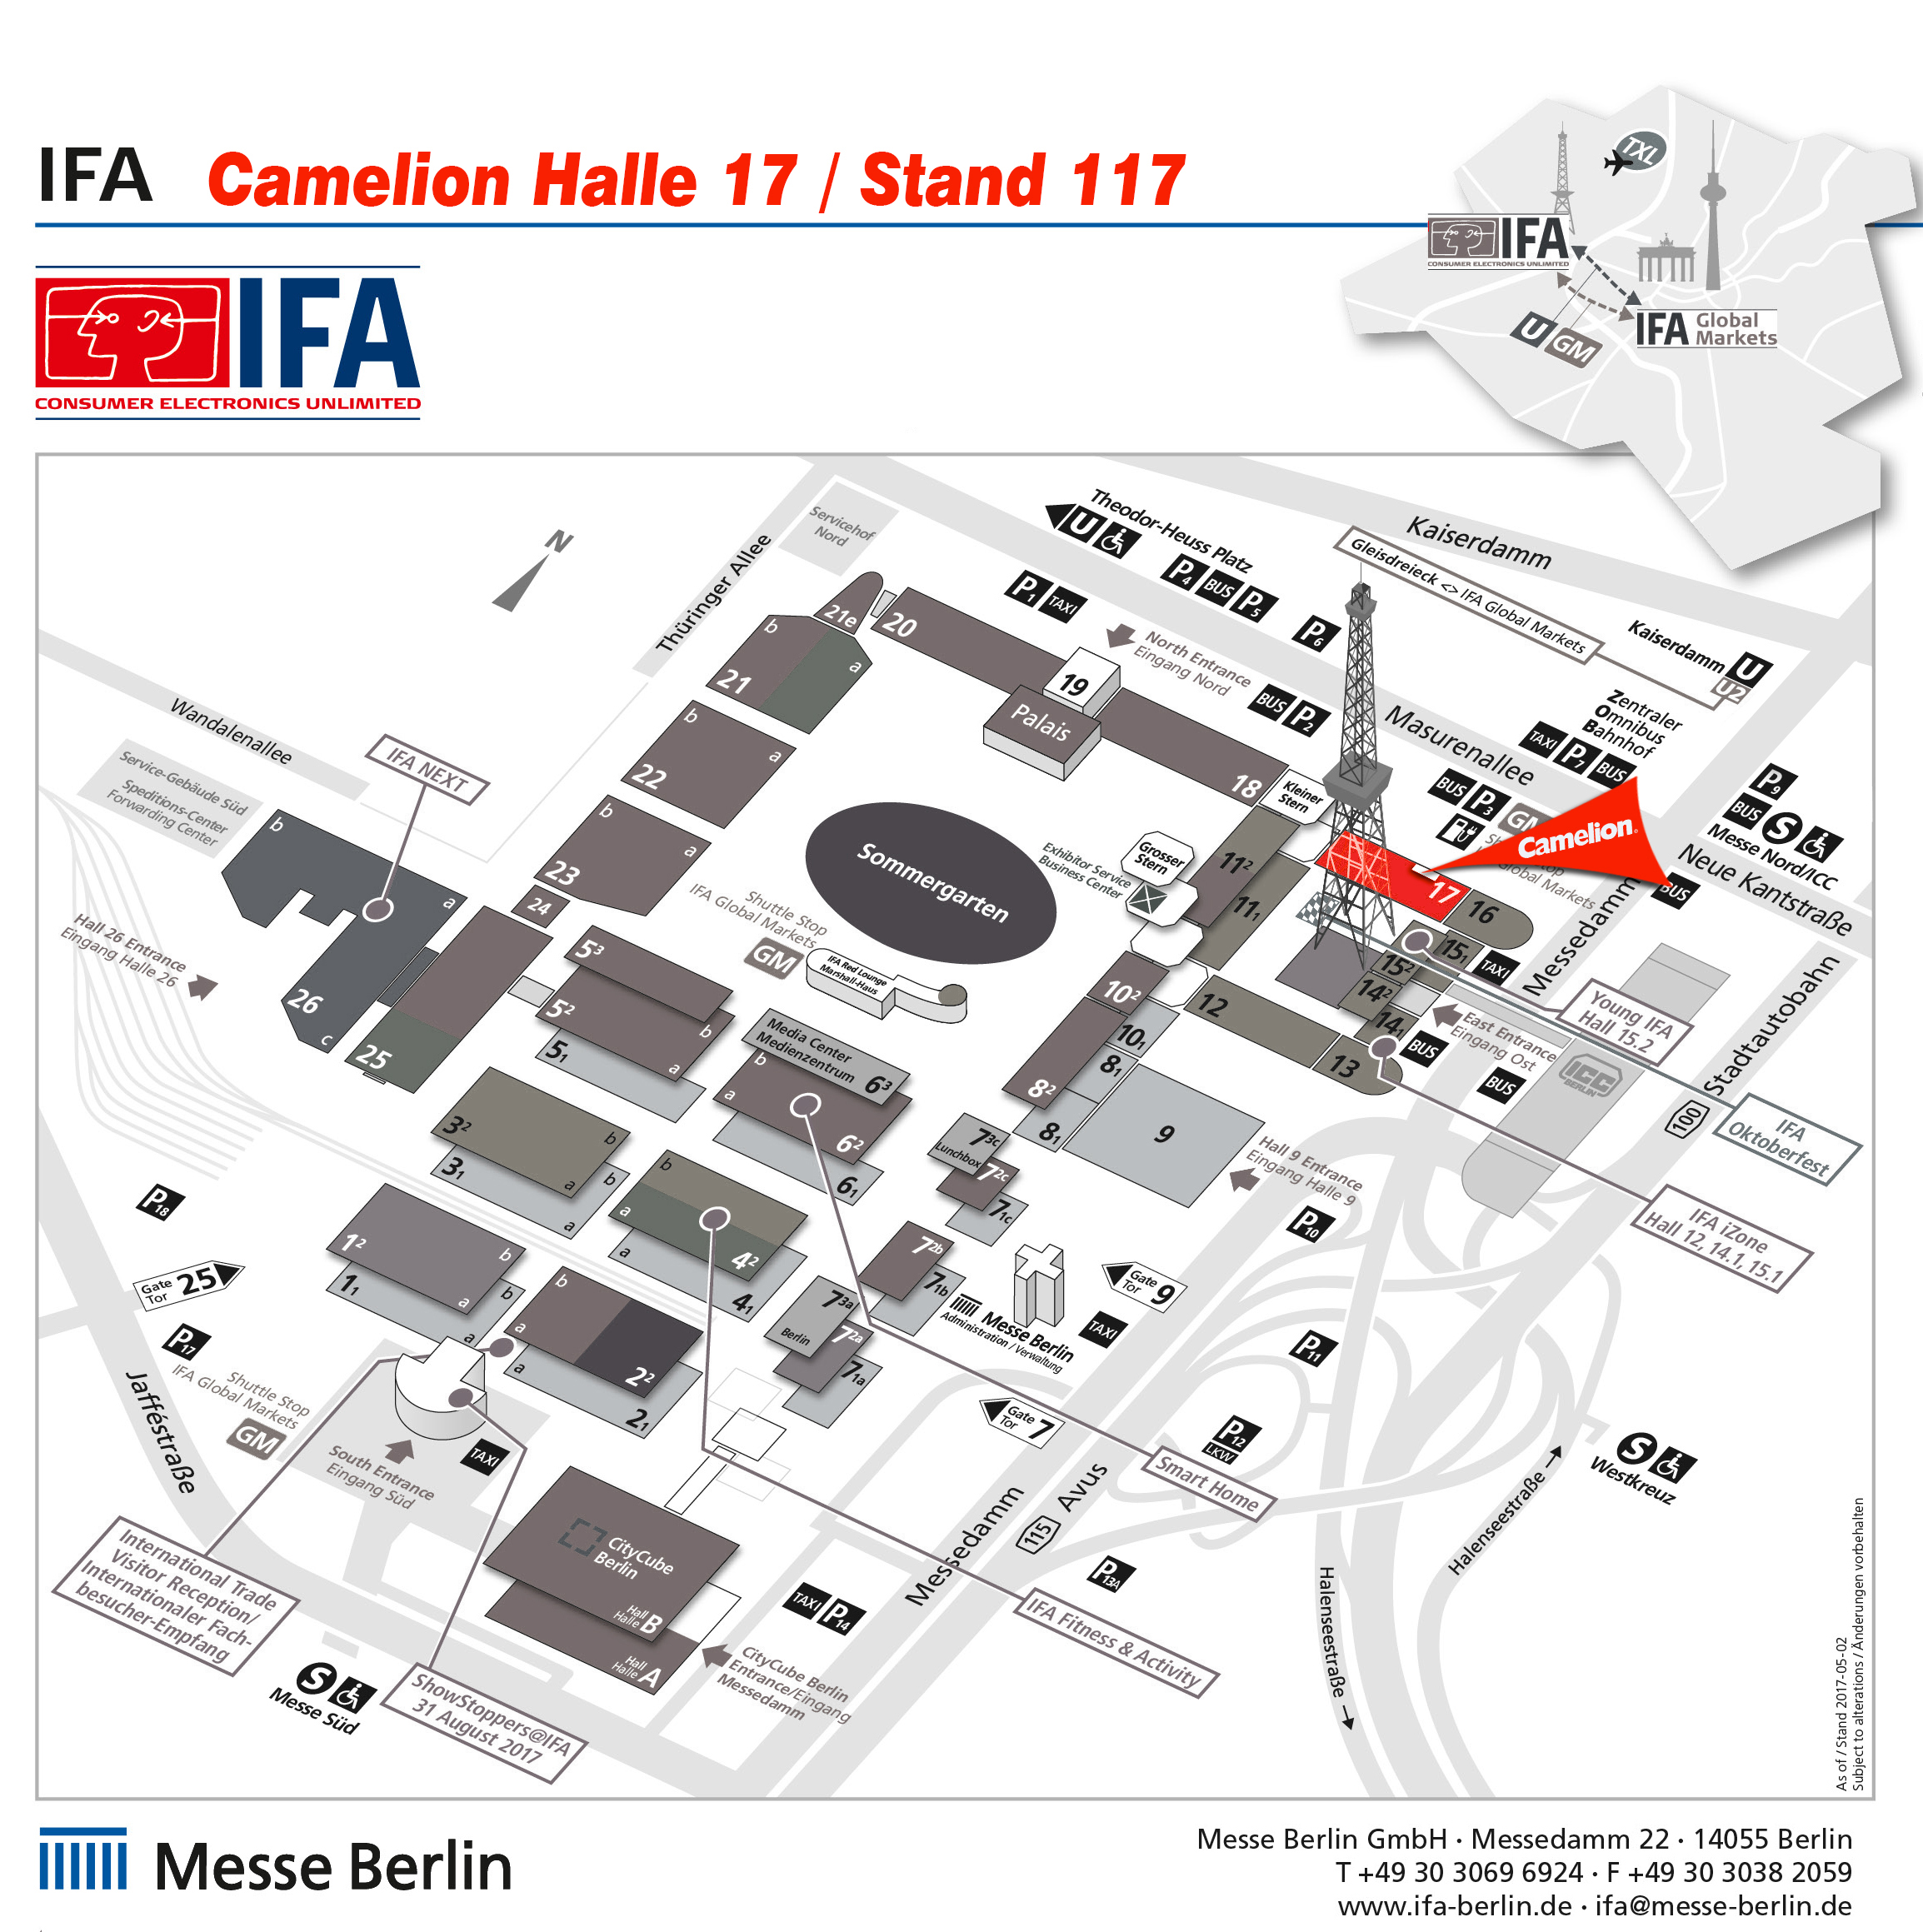 Halle 17 / Stand 117